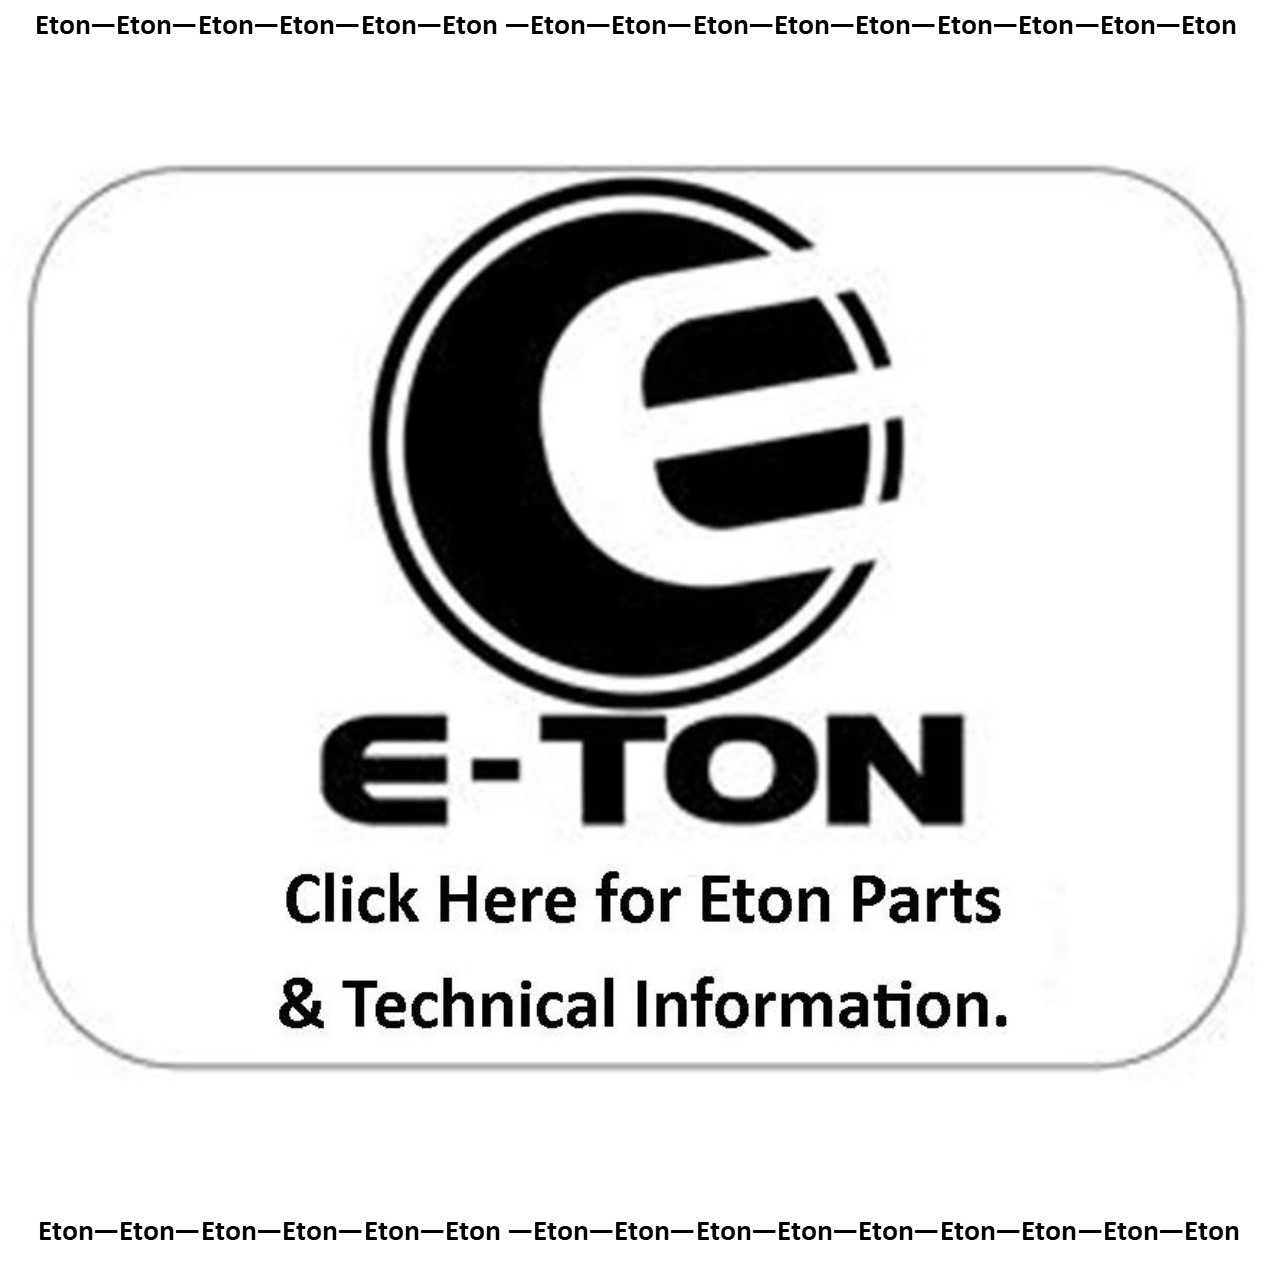 Eton Parts and Technical